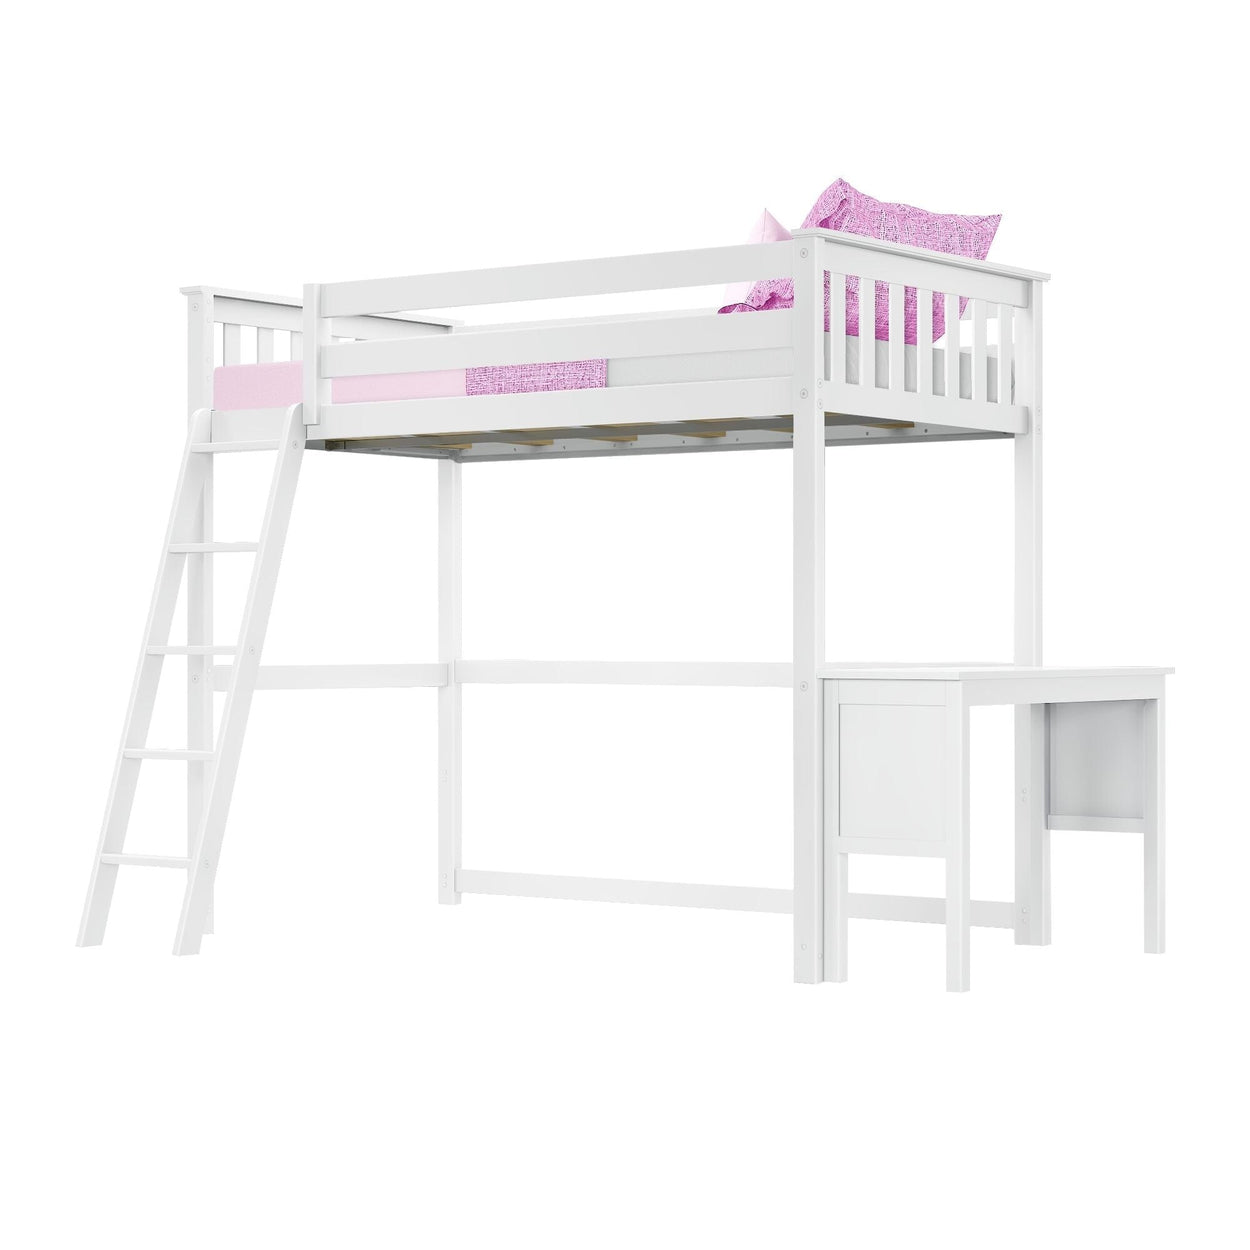 185427-002 : Loft Beds Twin-Size High Loft Bed with Ladder on End and Desk, White